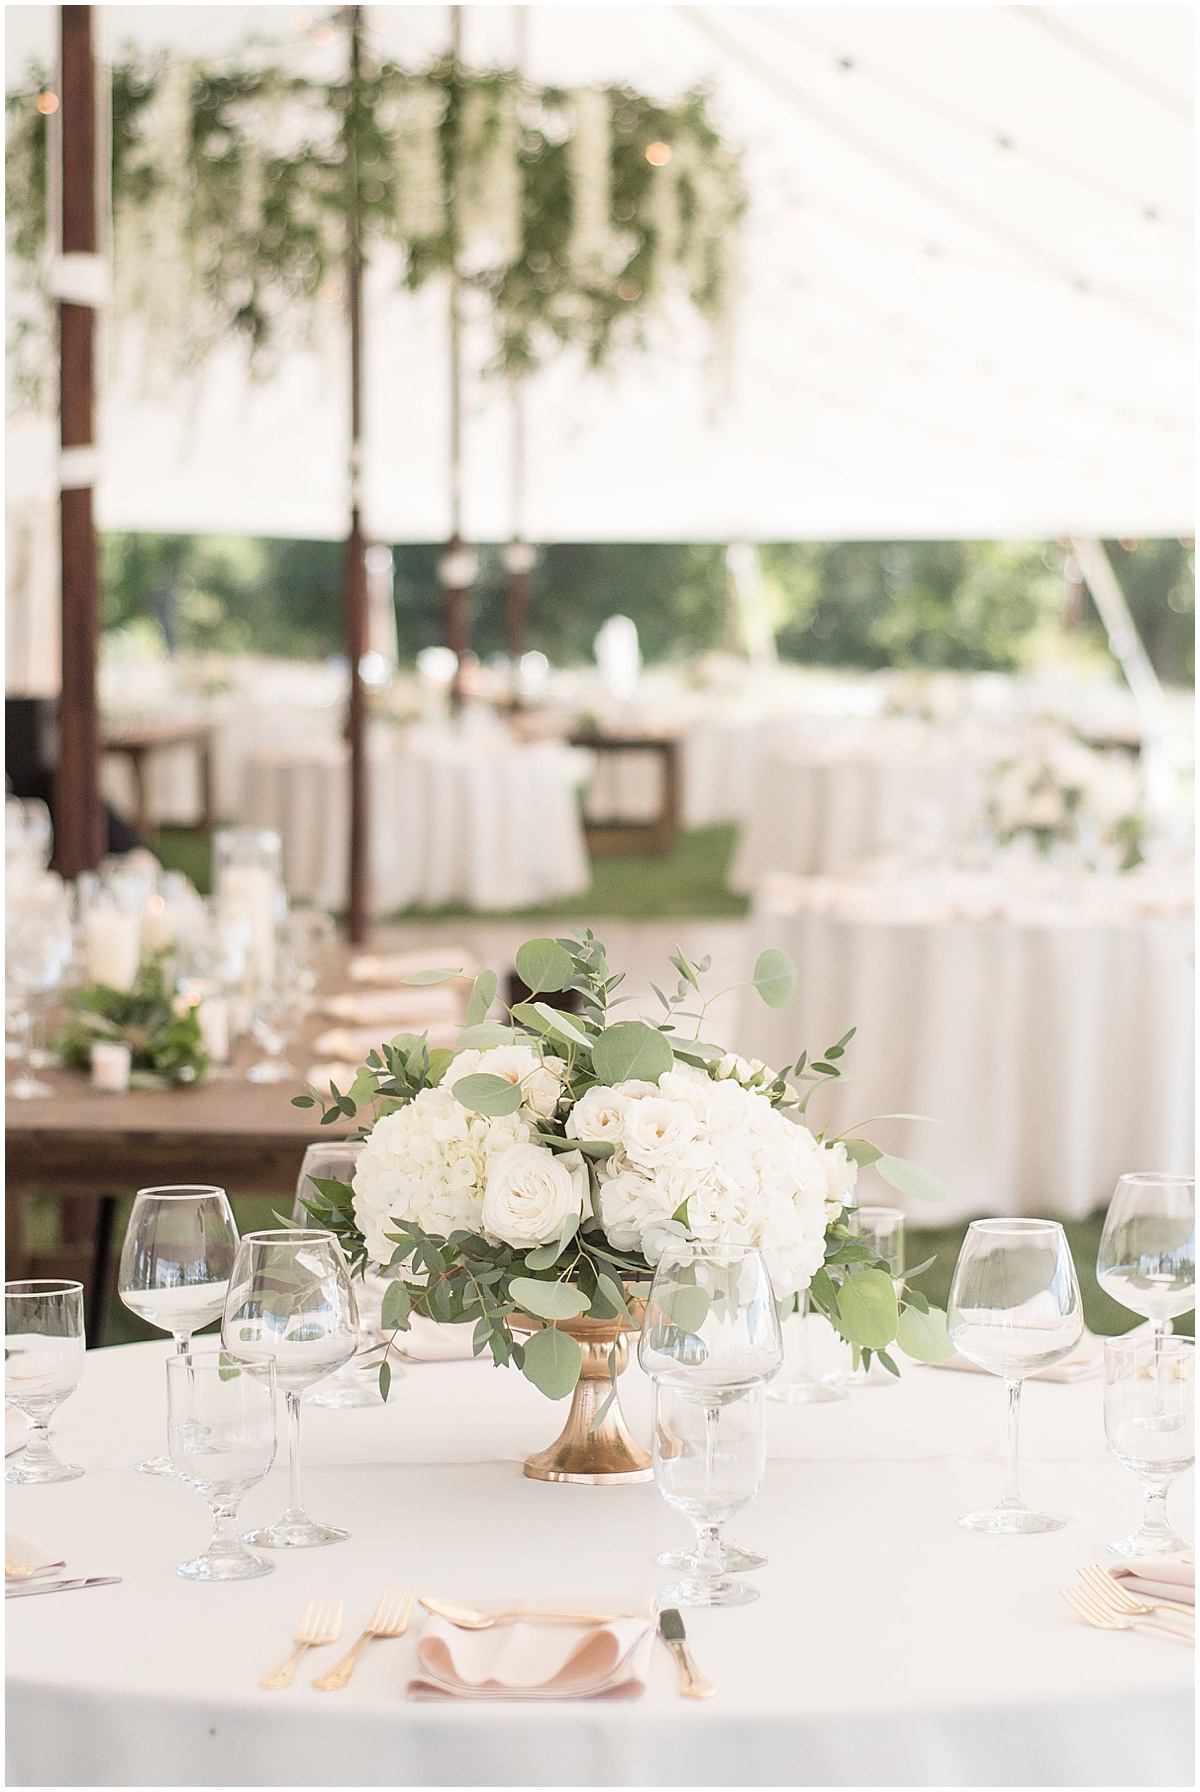 Wedding in Rochester, Indiana photographed by Victoria Rayburn Photography